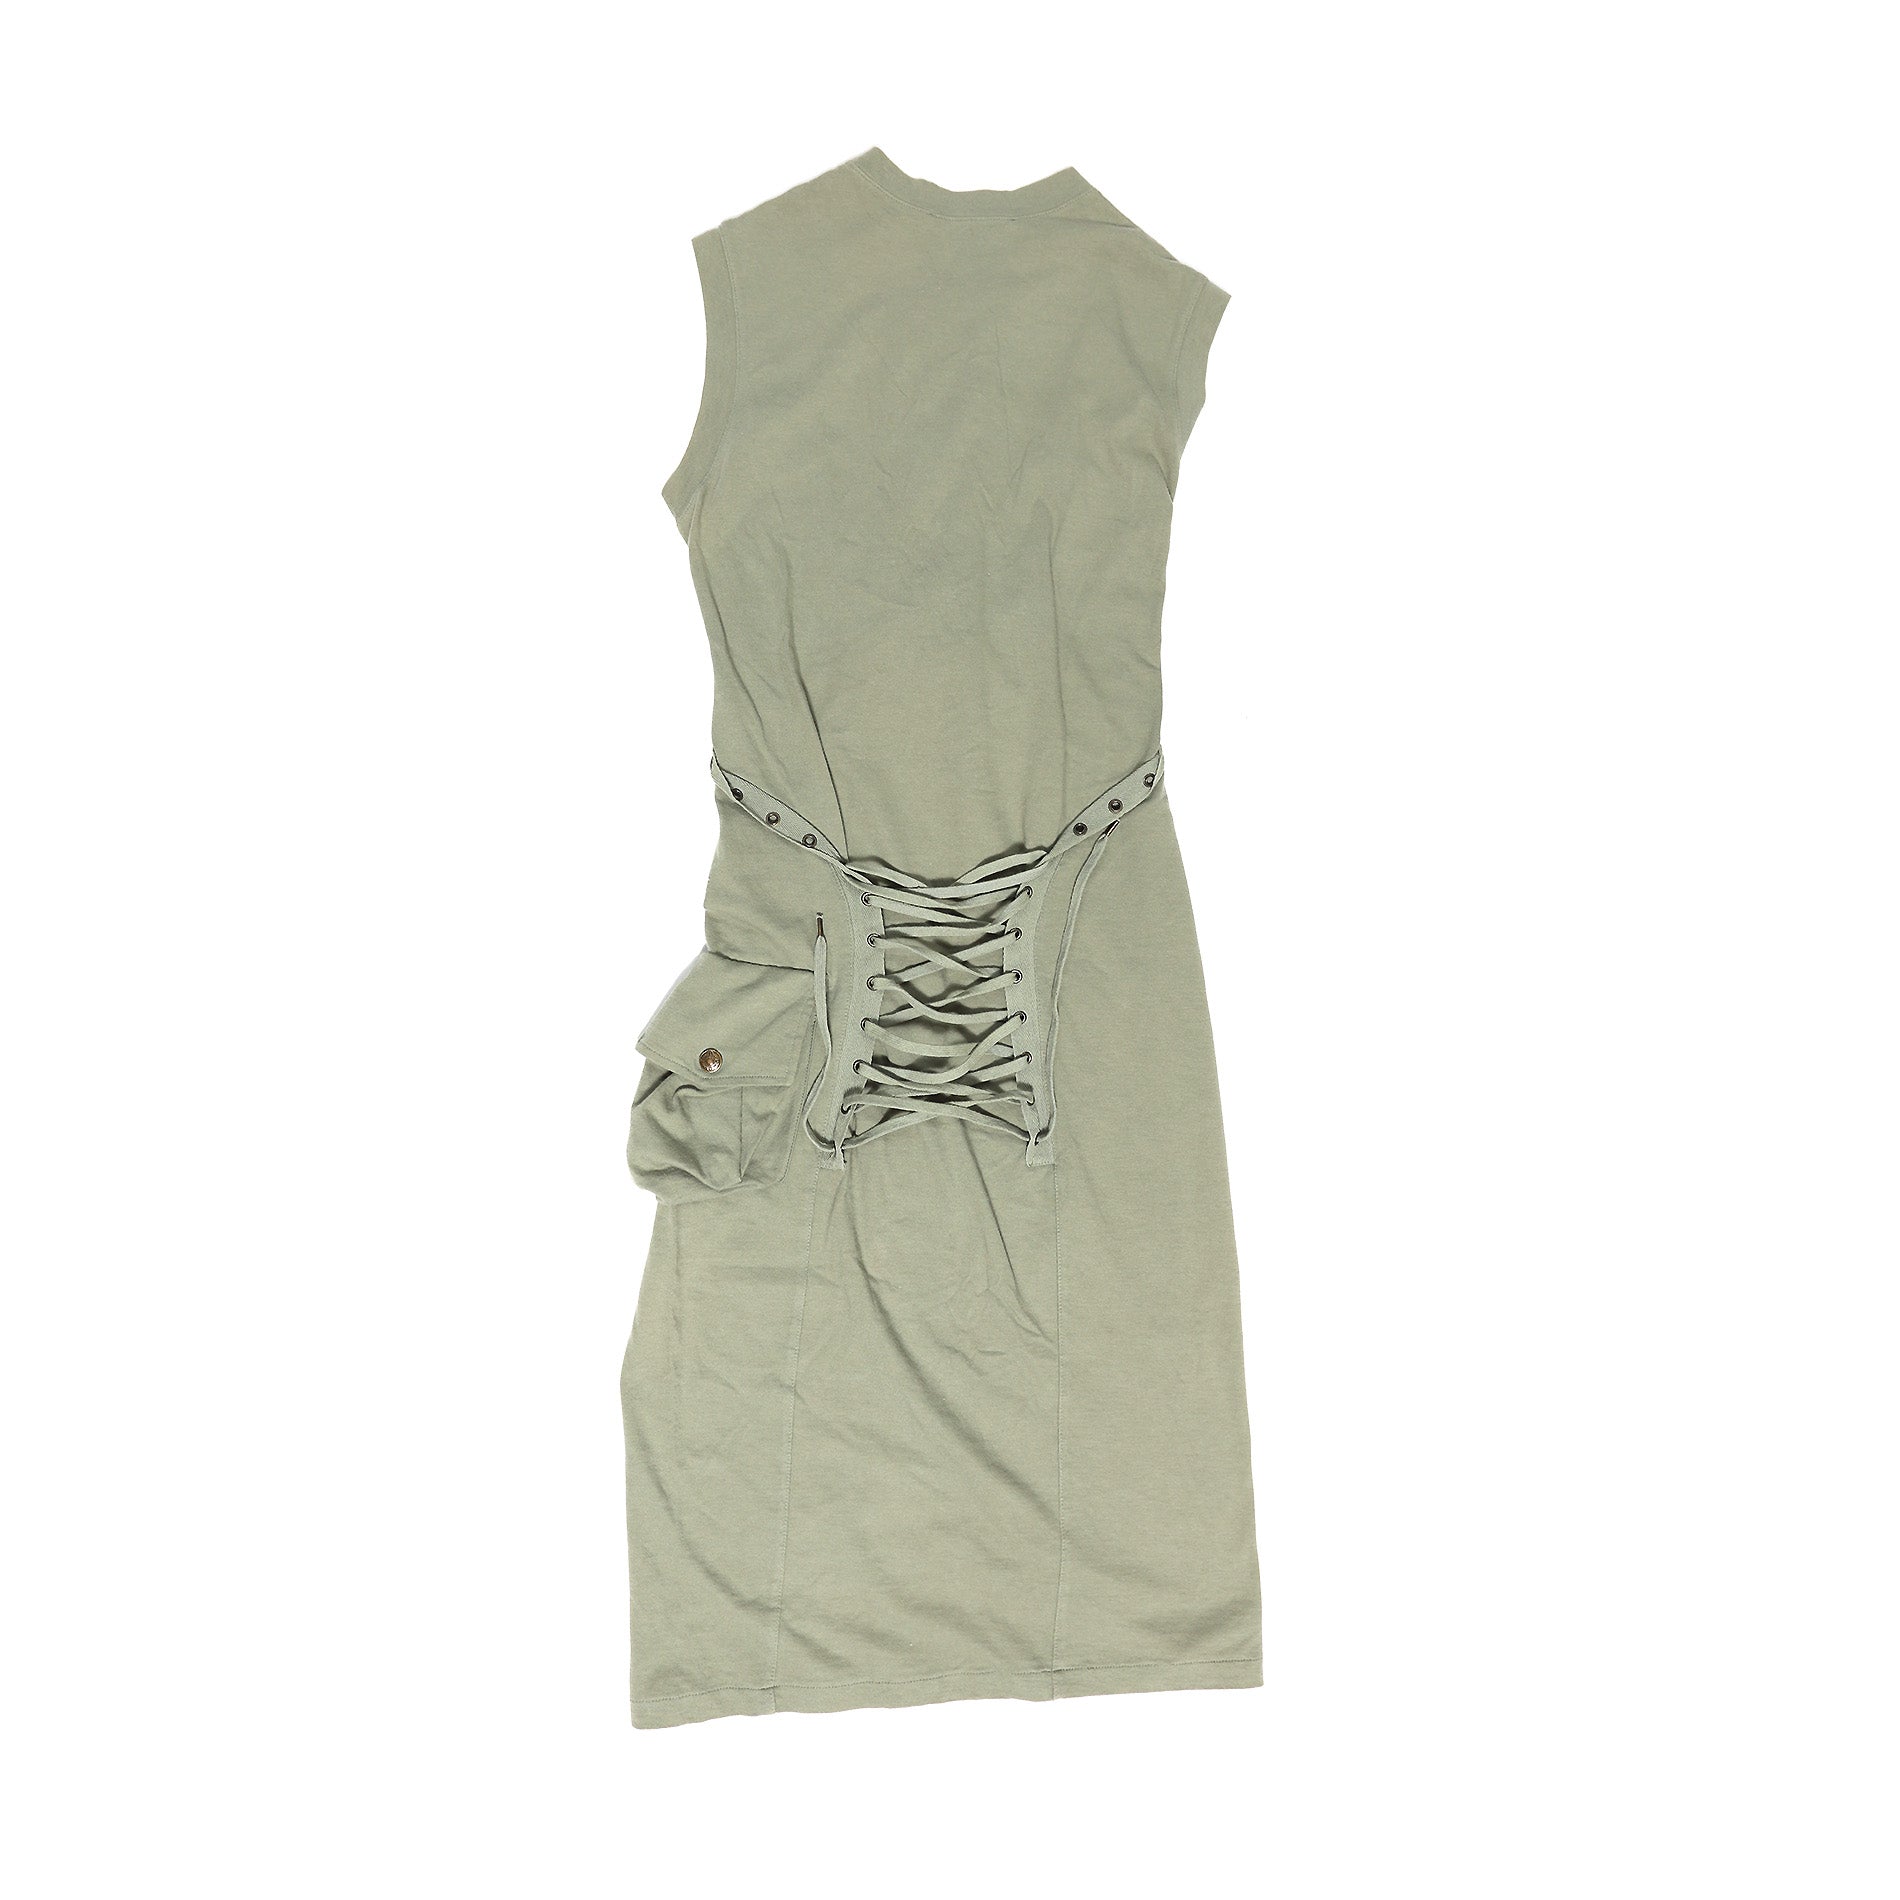 Christian Dior SS03 Lace-Up Cargo Pocket Dress by John Galliano